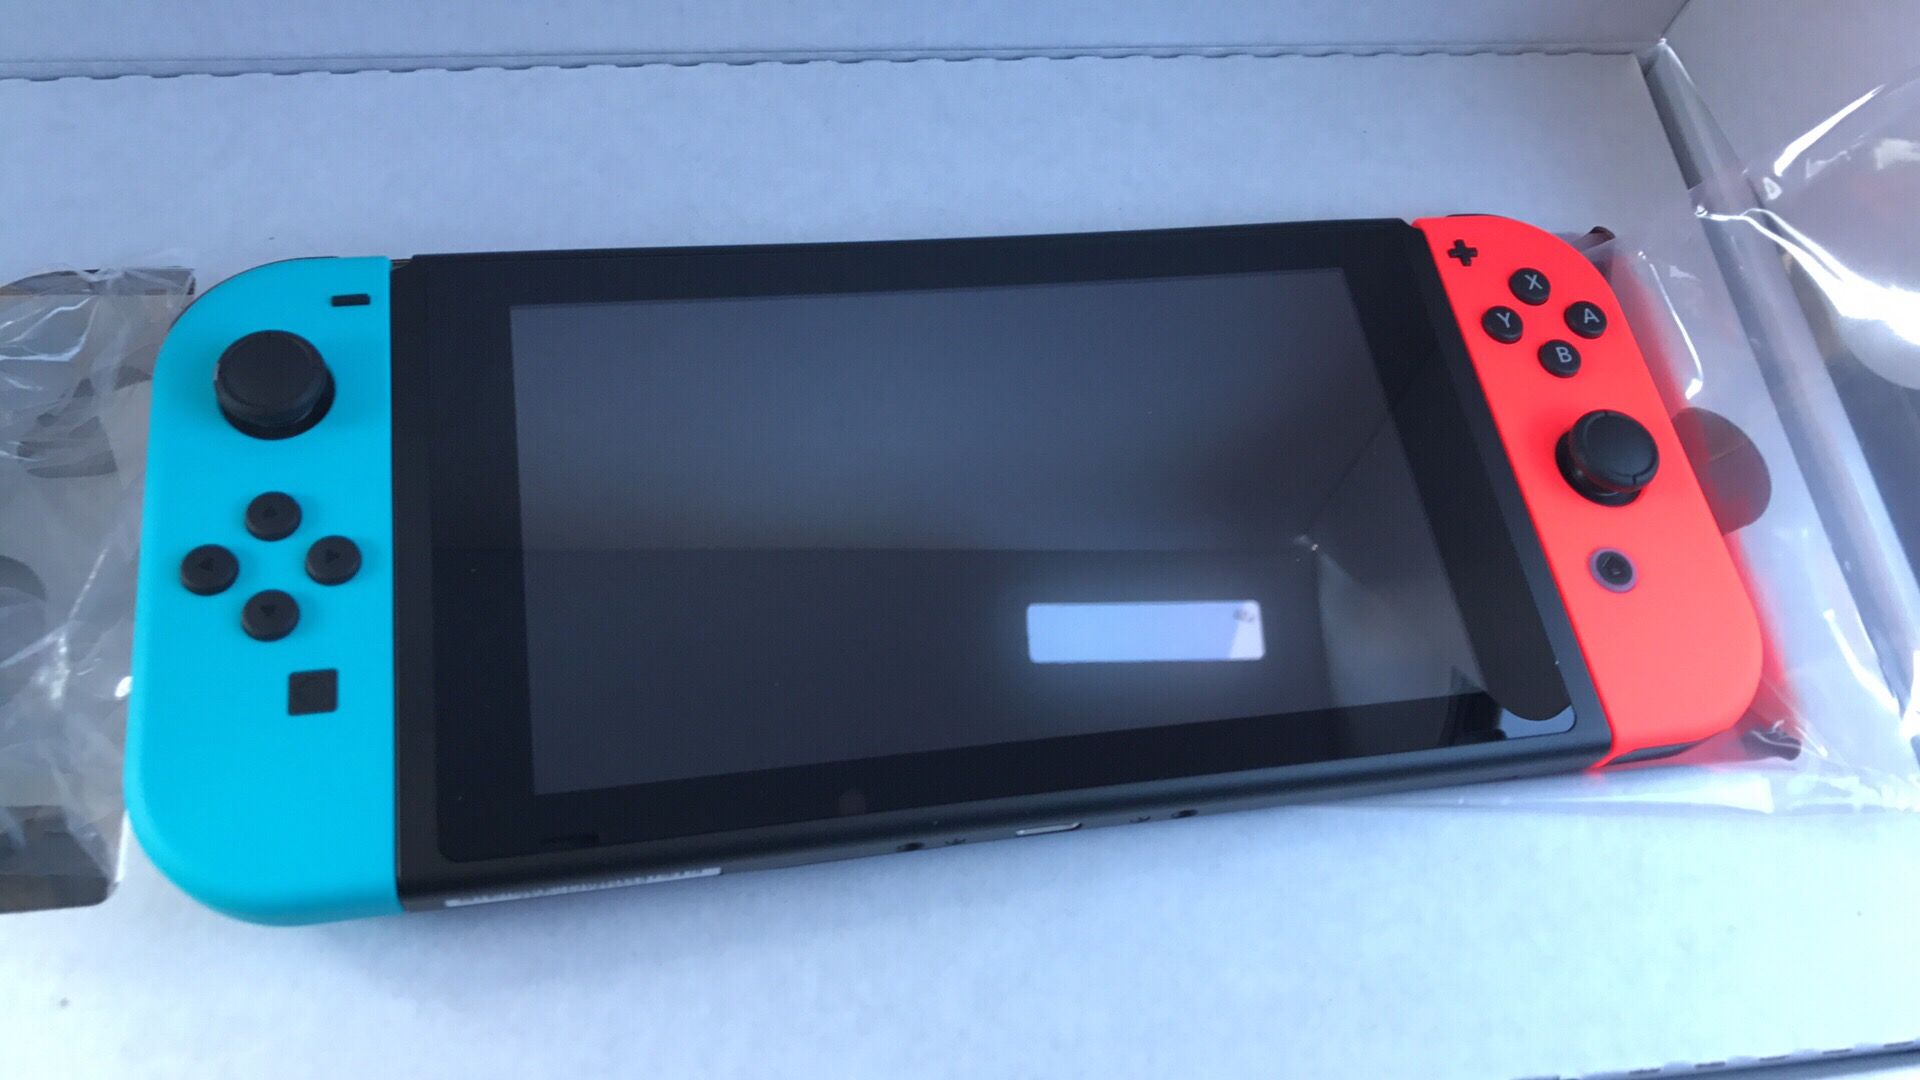 Nintendo Switch primo video unboxing ufficiale   TecnoGame